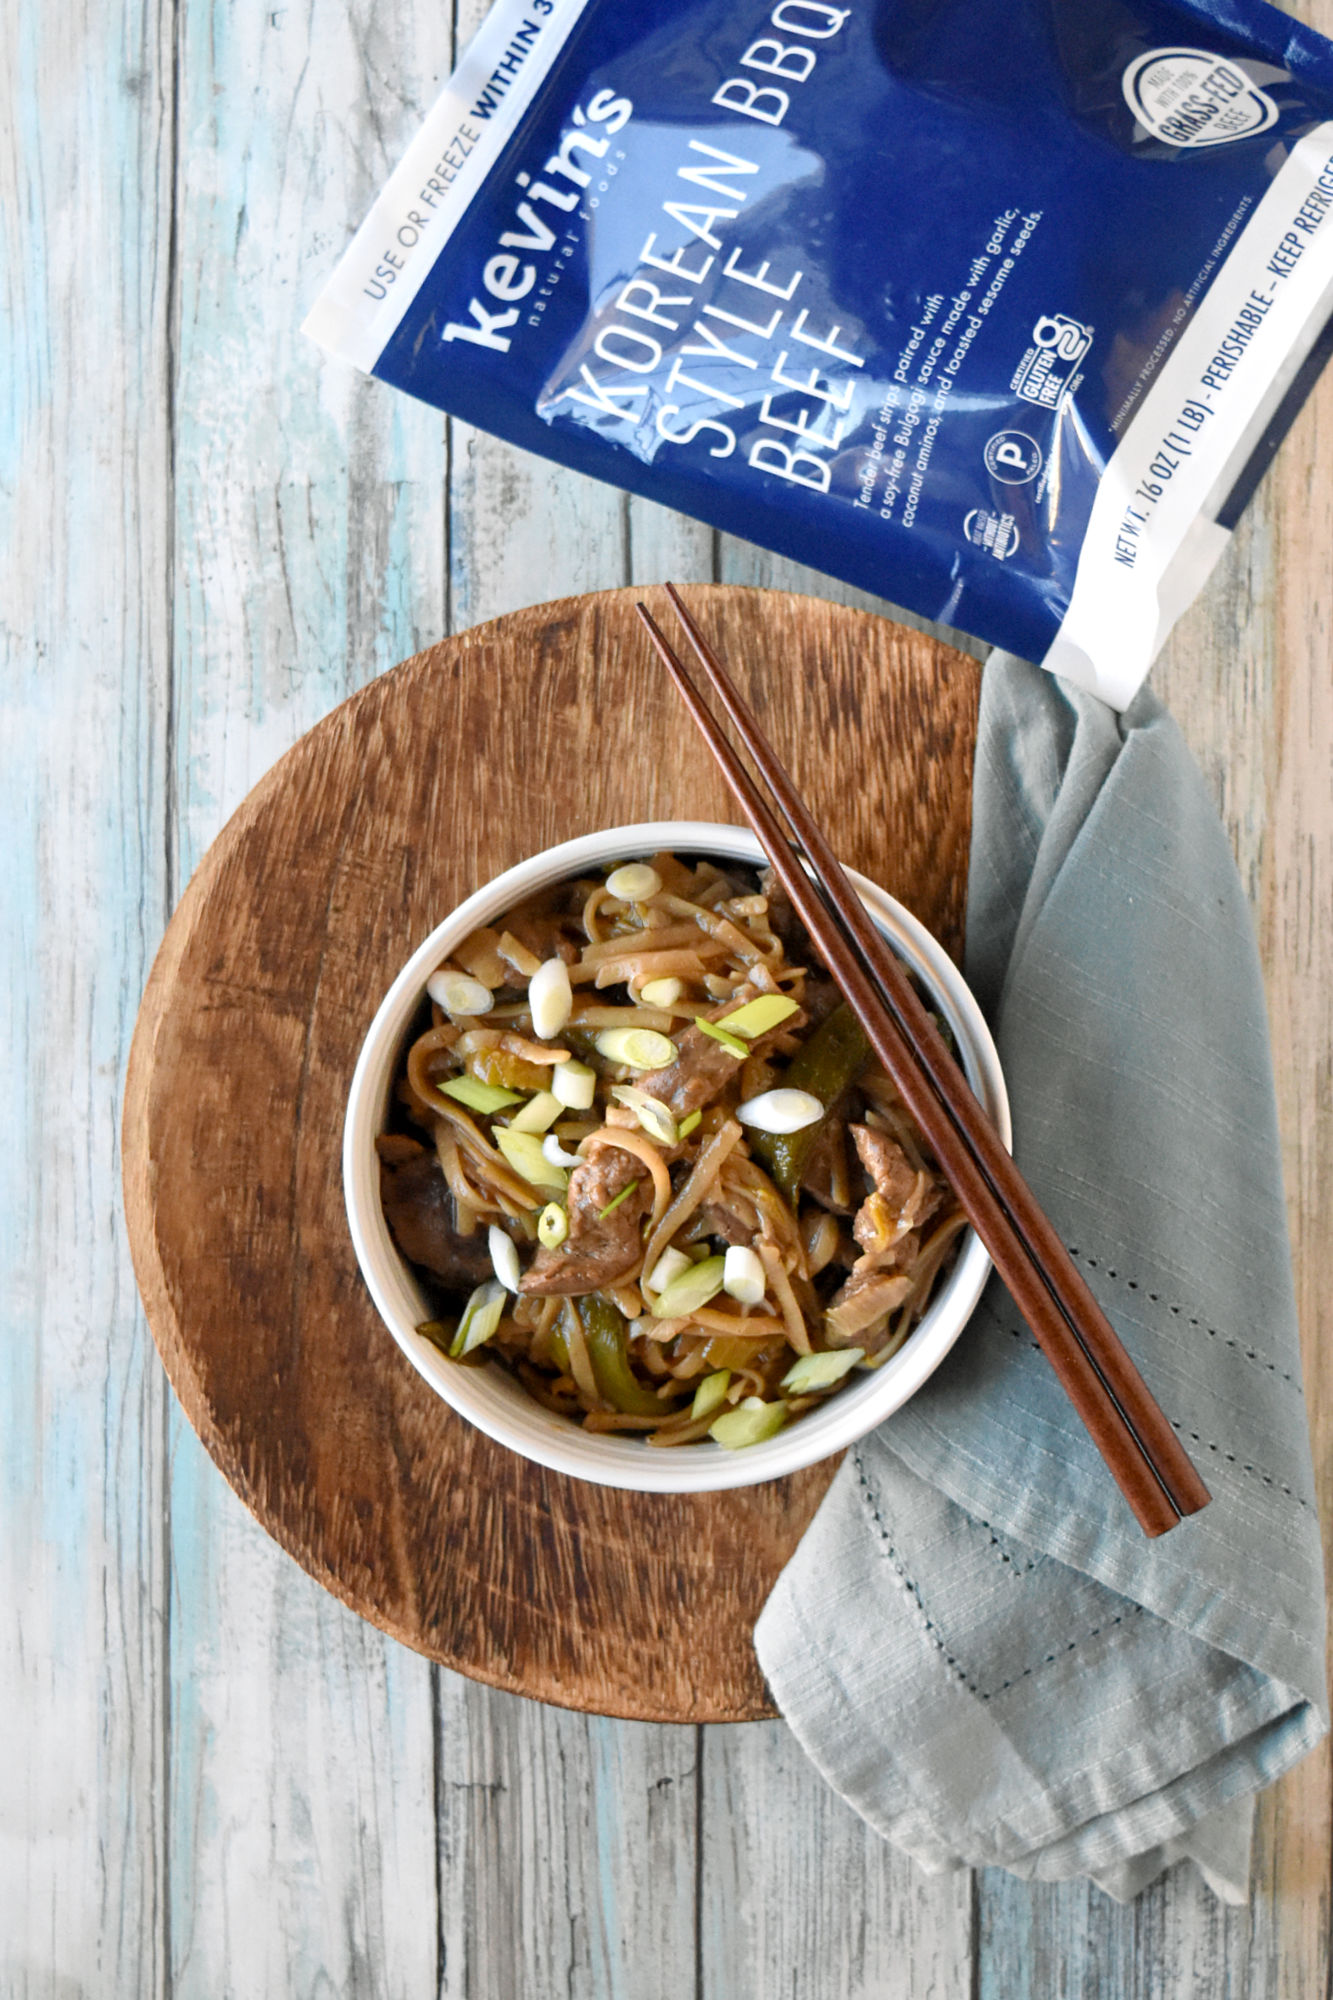 Korean BBQ Beef Stir Fry is packed with sweet and spicy Korean barbecue flavor, crispy vegetables, and delicious rice noodles.  It’s gluten free and totally delicious. #kevinsrecipechallenge #KoreanBBQBeef #glutenfree